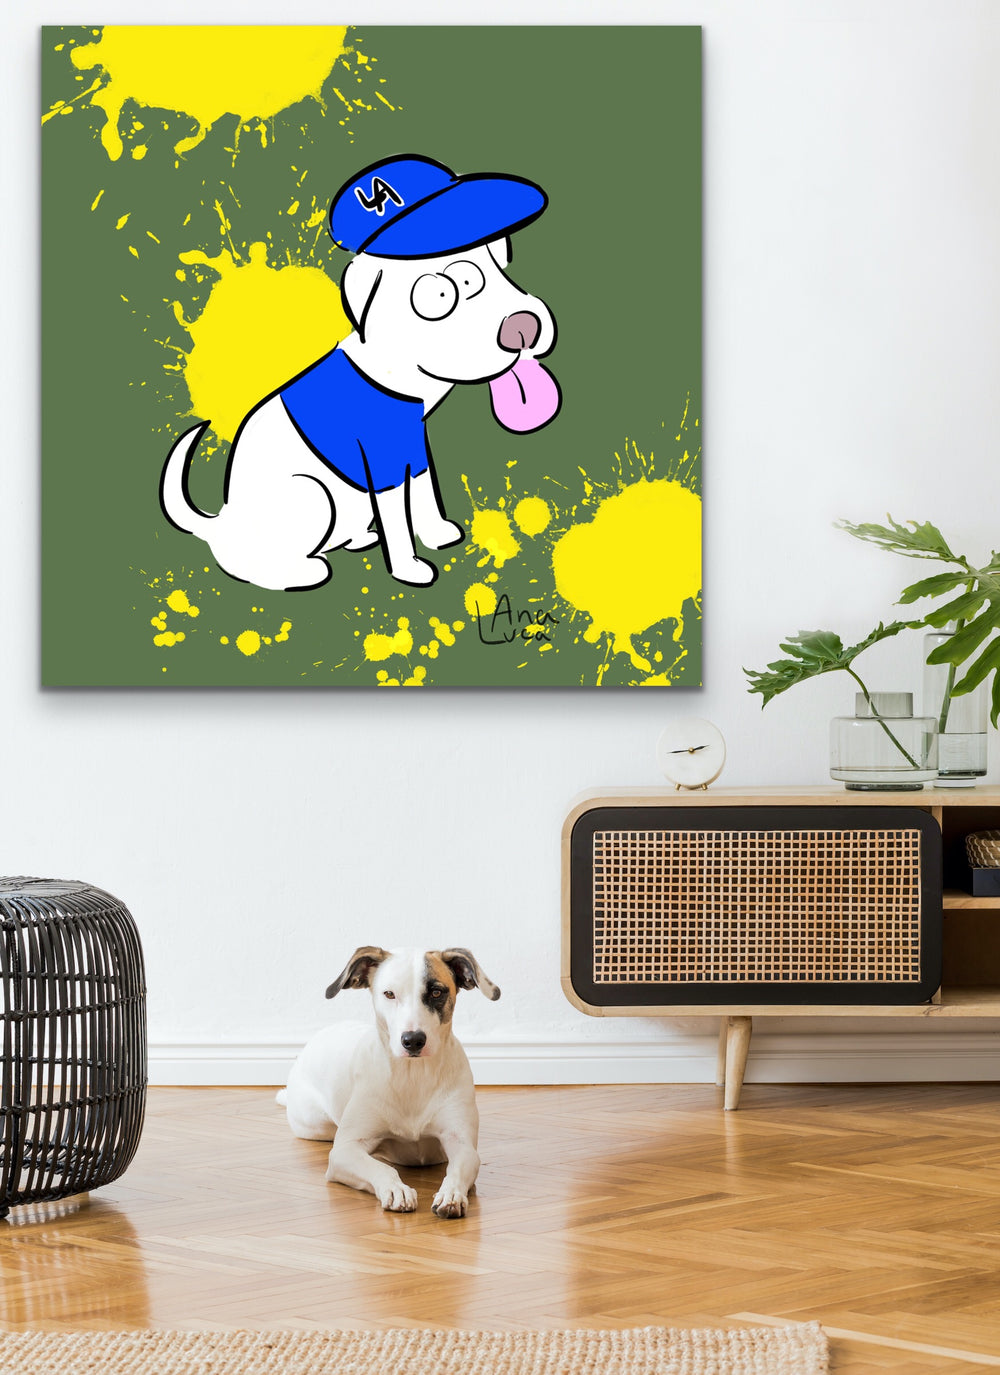 Gotta Represent My Dogs 48"X48" Limited Edition Framed Canvas Art (of 10)